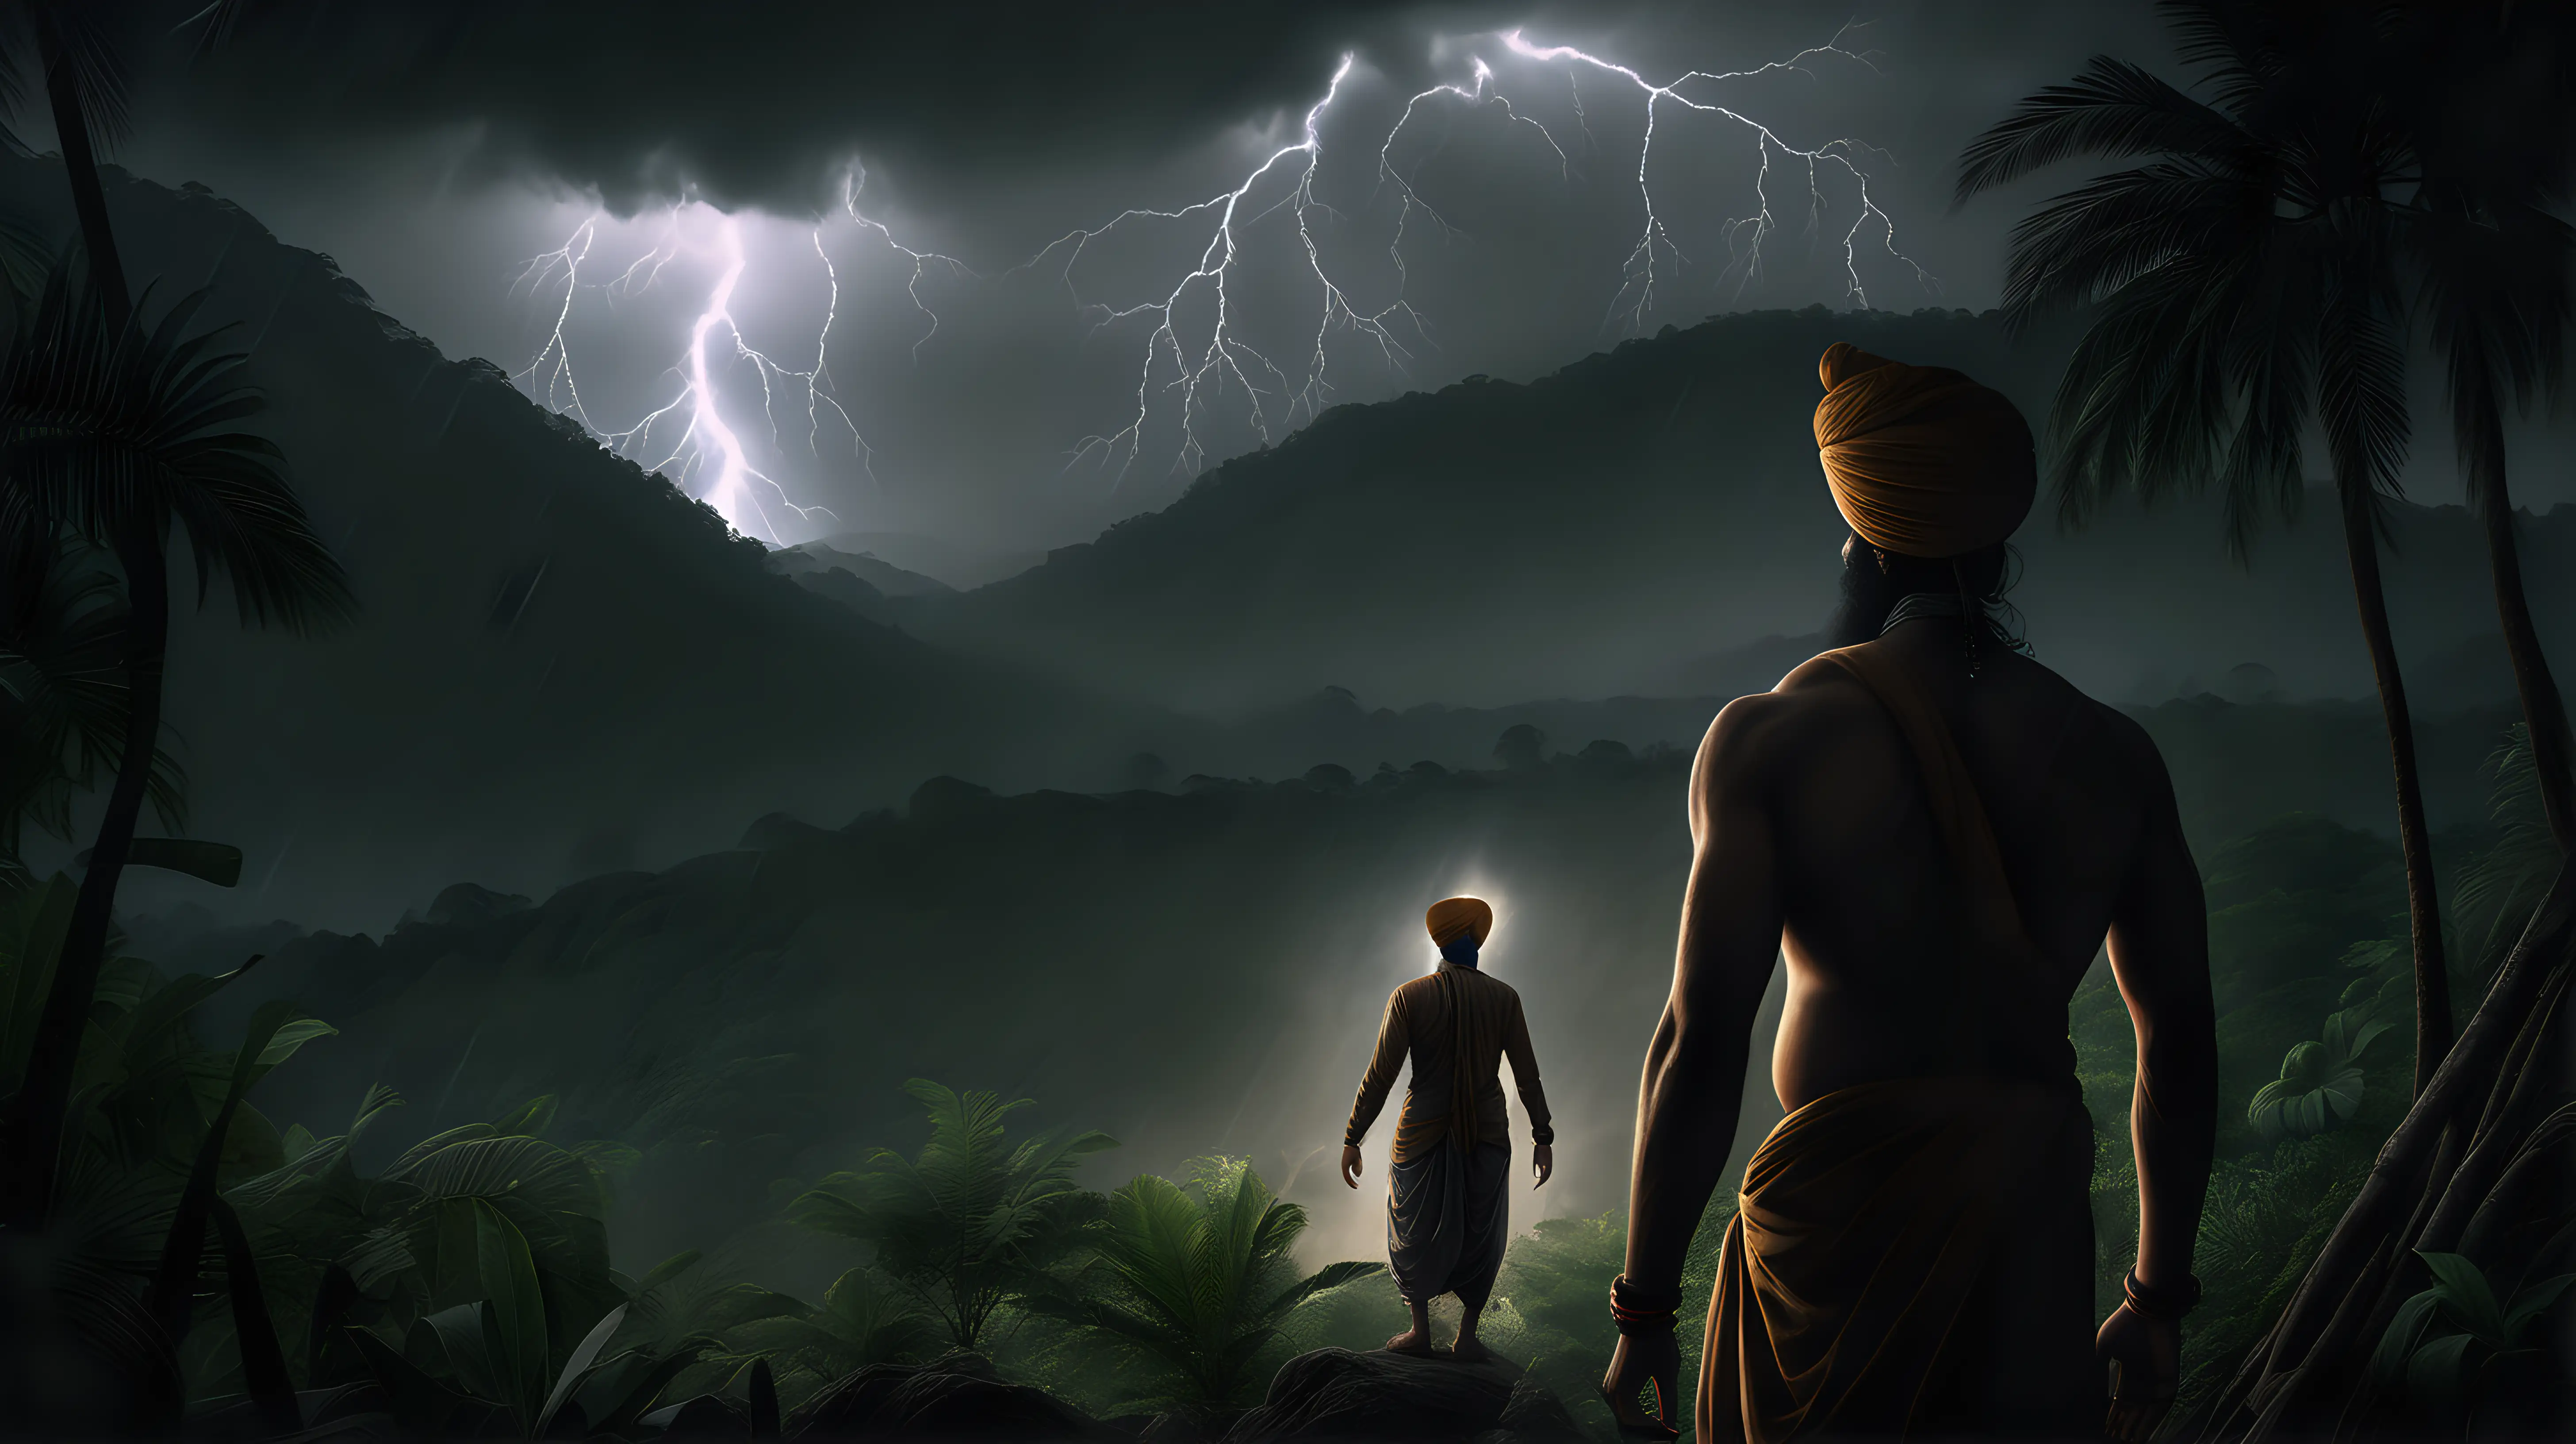 Sikh Man in Mystical Jungle V6 Digital Rendering with Chiaroscuro and Lightning